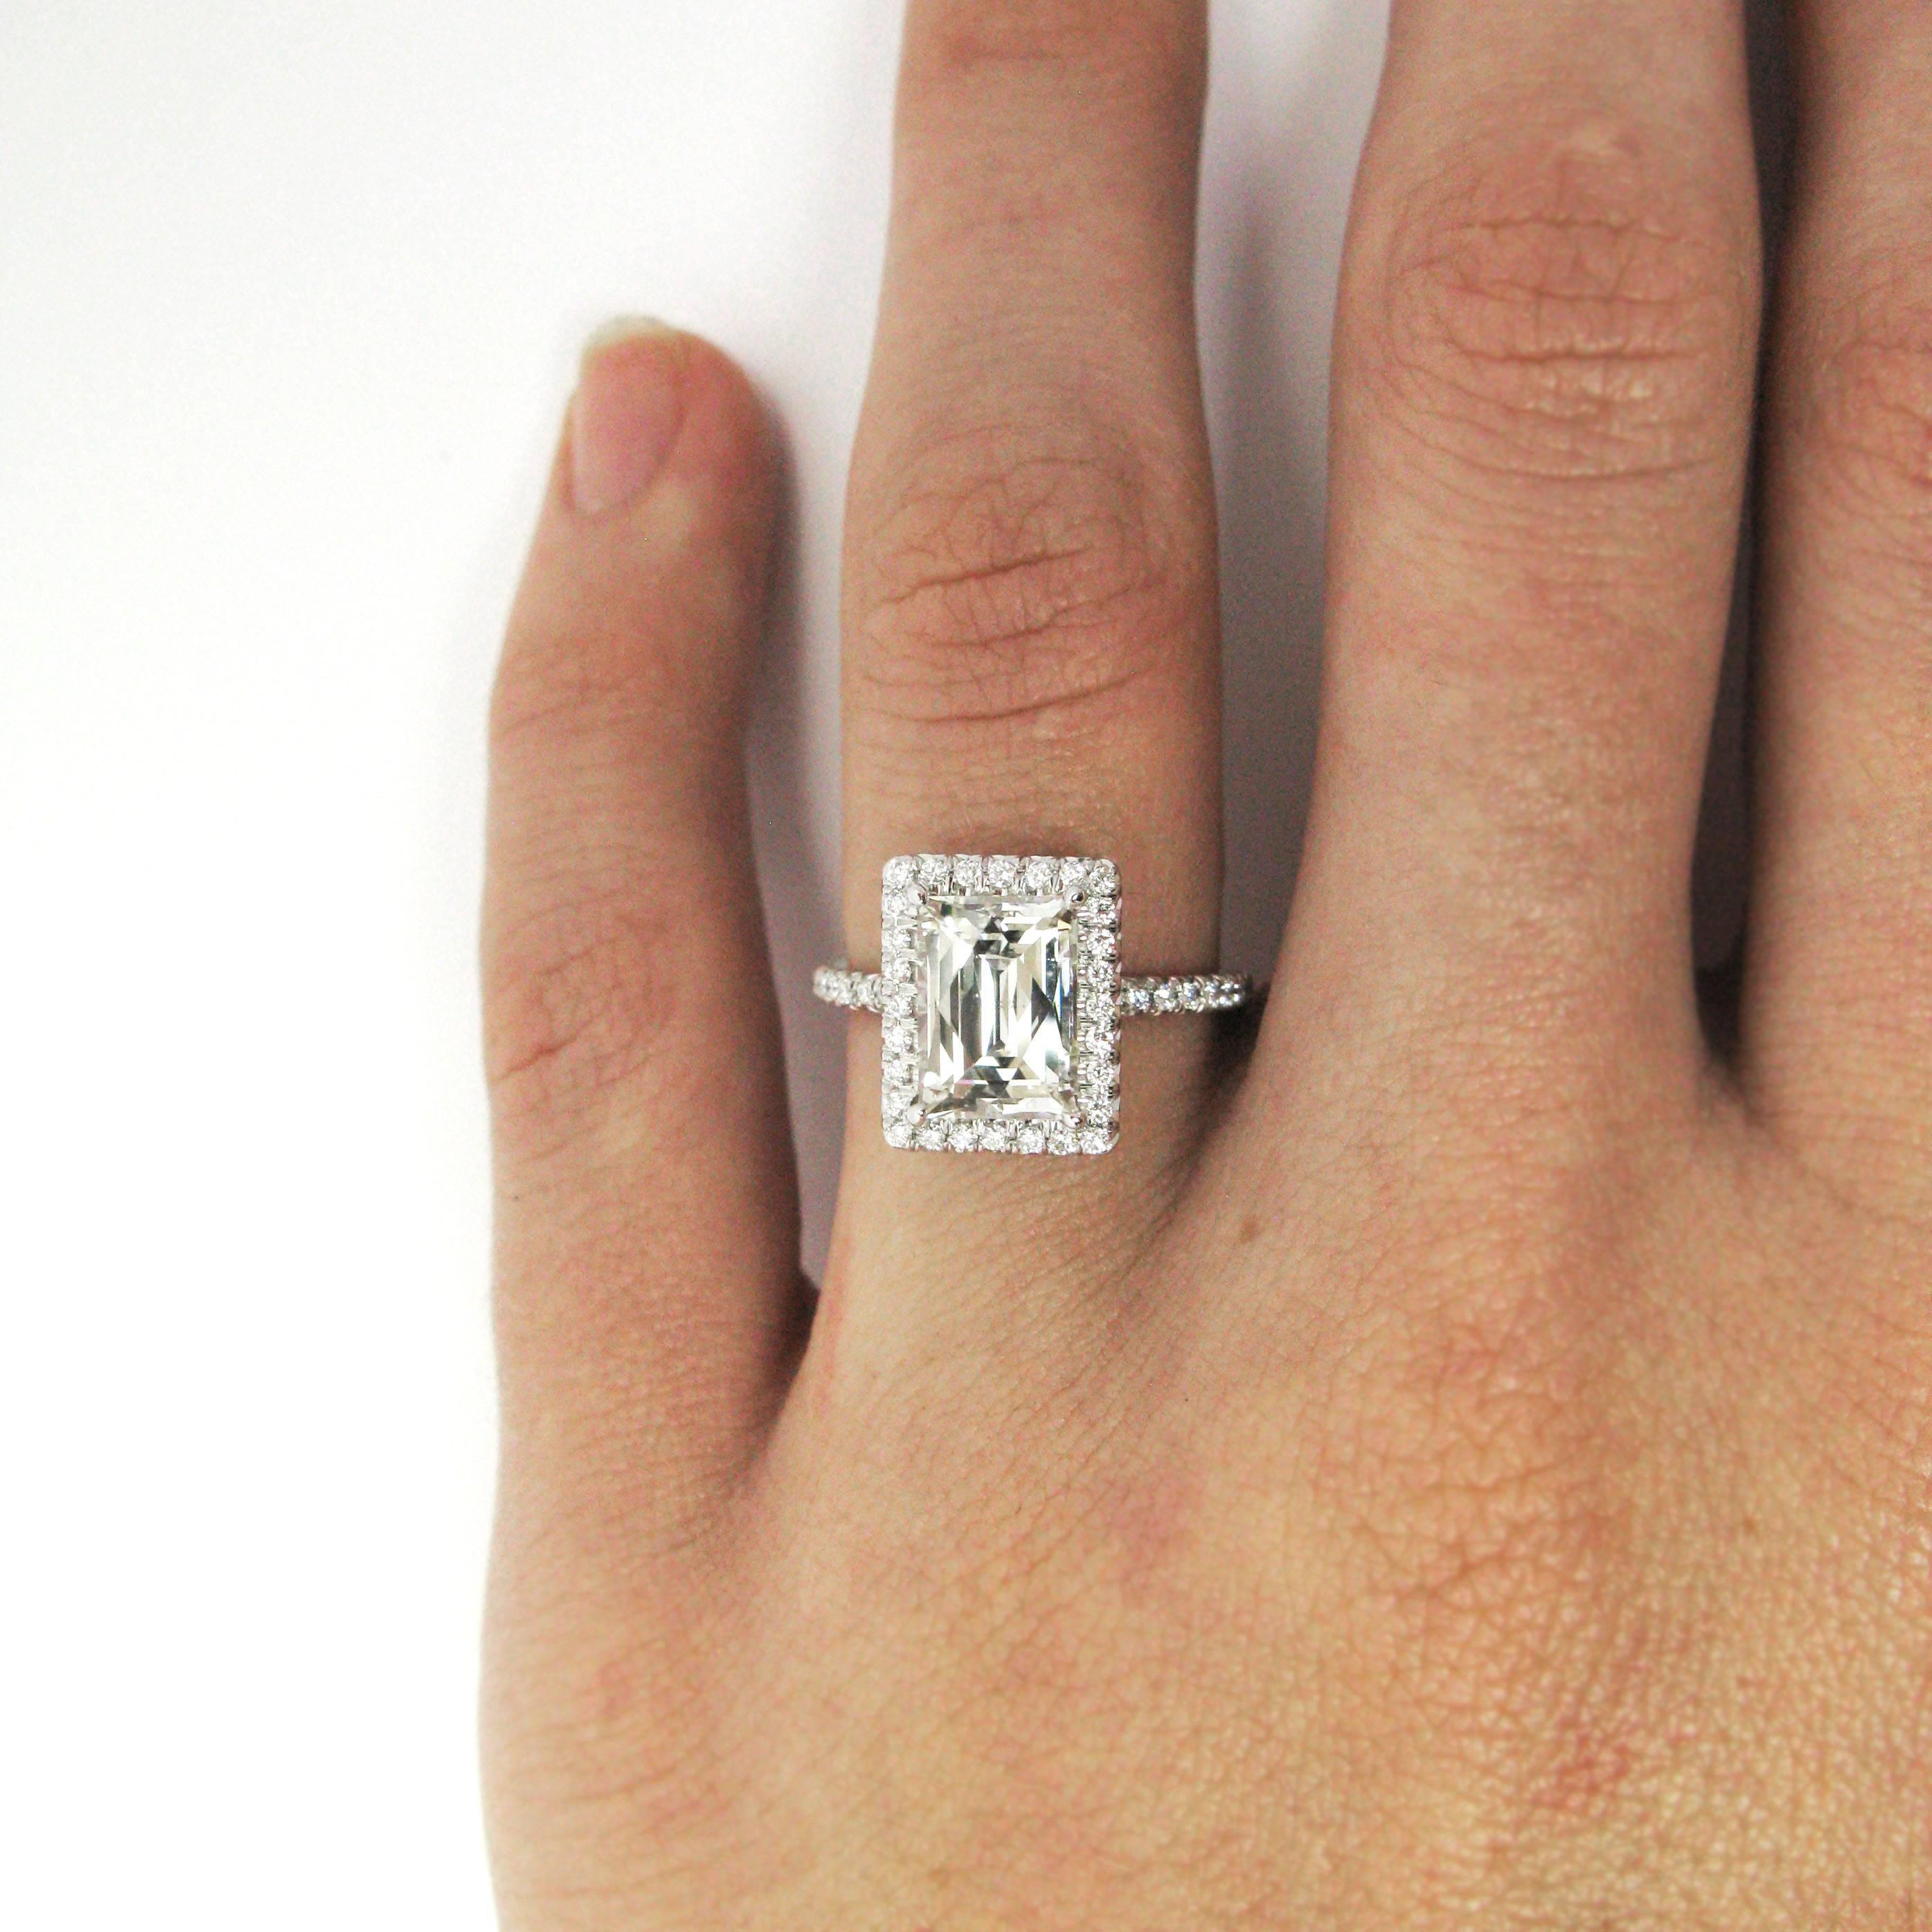 This one-of-a-kind handmade platinum frame ring encrusted with 0.35 carat total of pave-set diamonds features a unique 2.22 carat Tycoon cut diamond with I color and SI1 clarity. With this beautiful ring, you will be the envy of all your